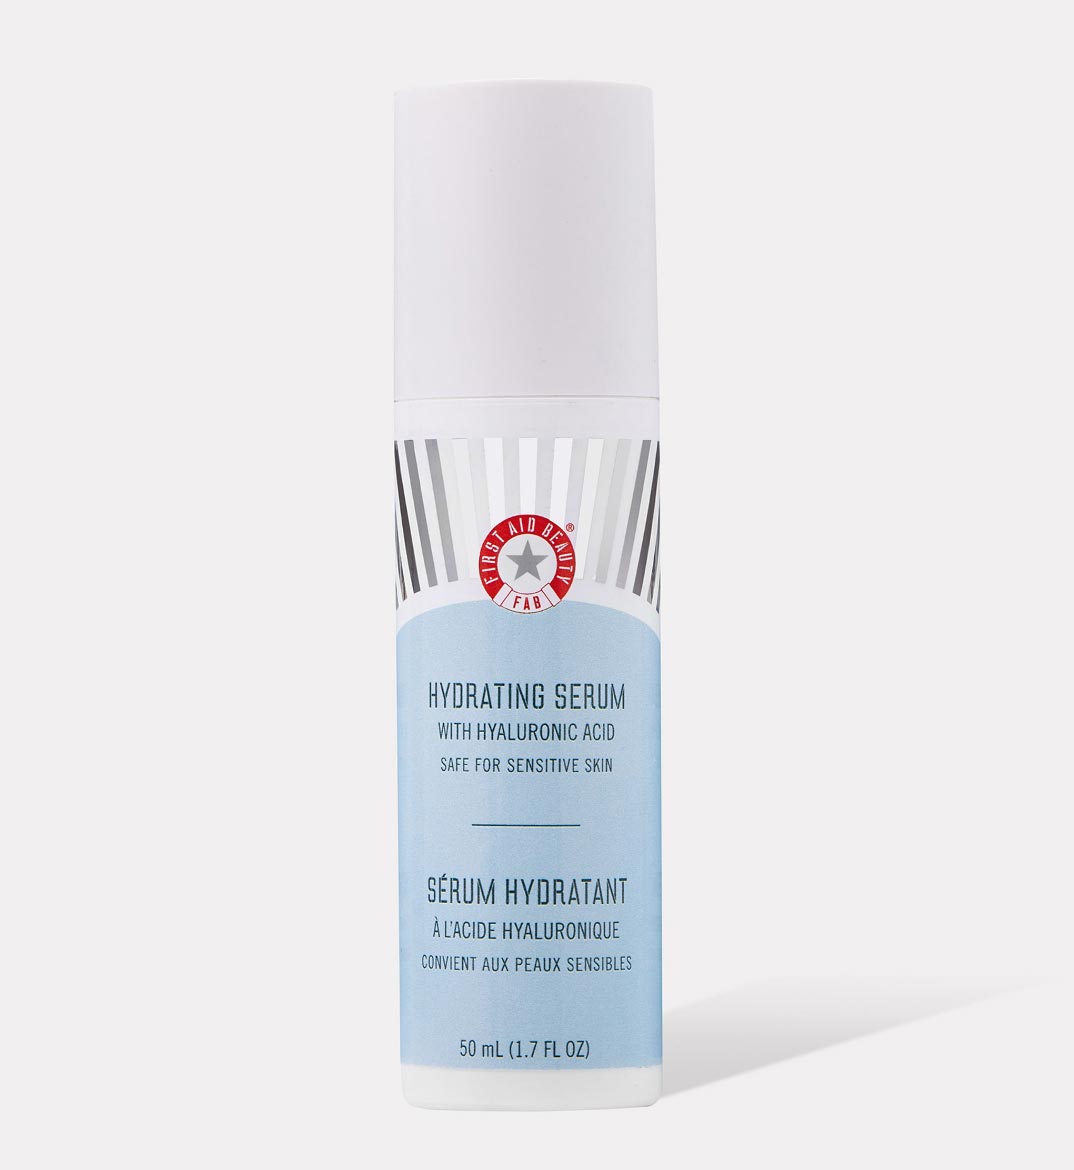 Hydrating Serum by First Aid Beauty